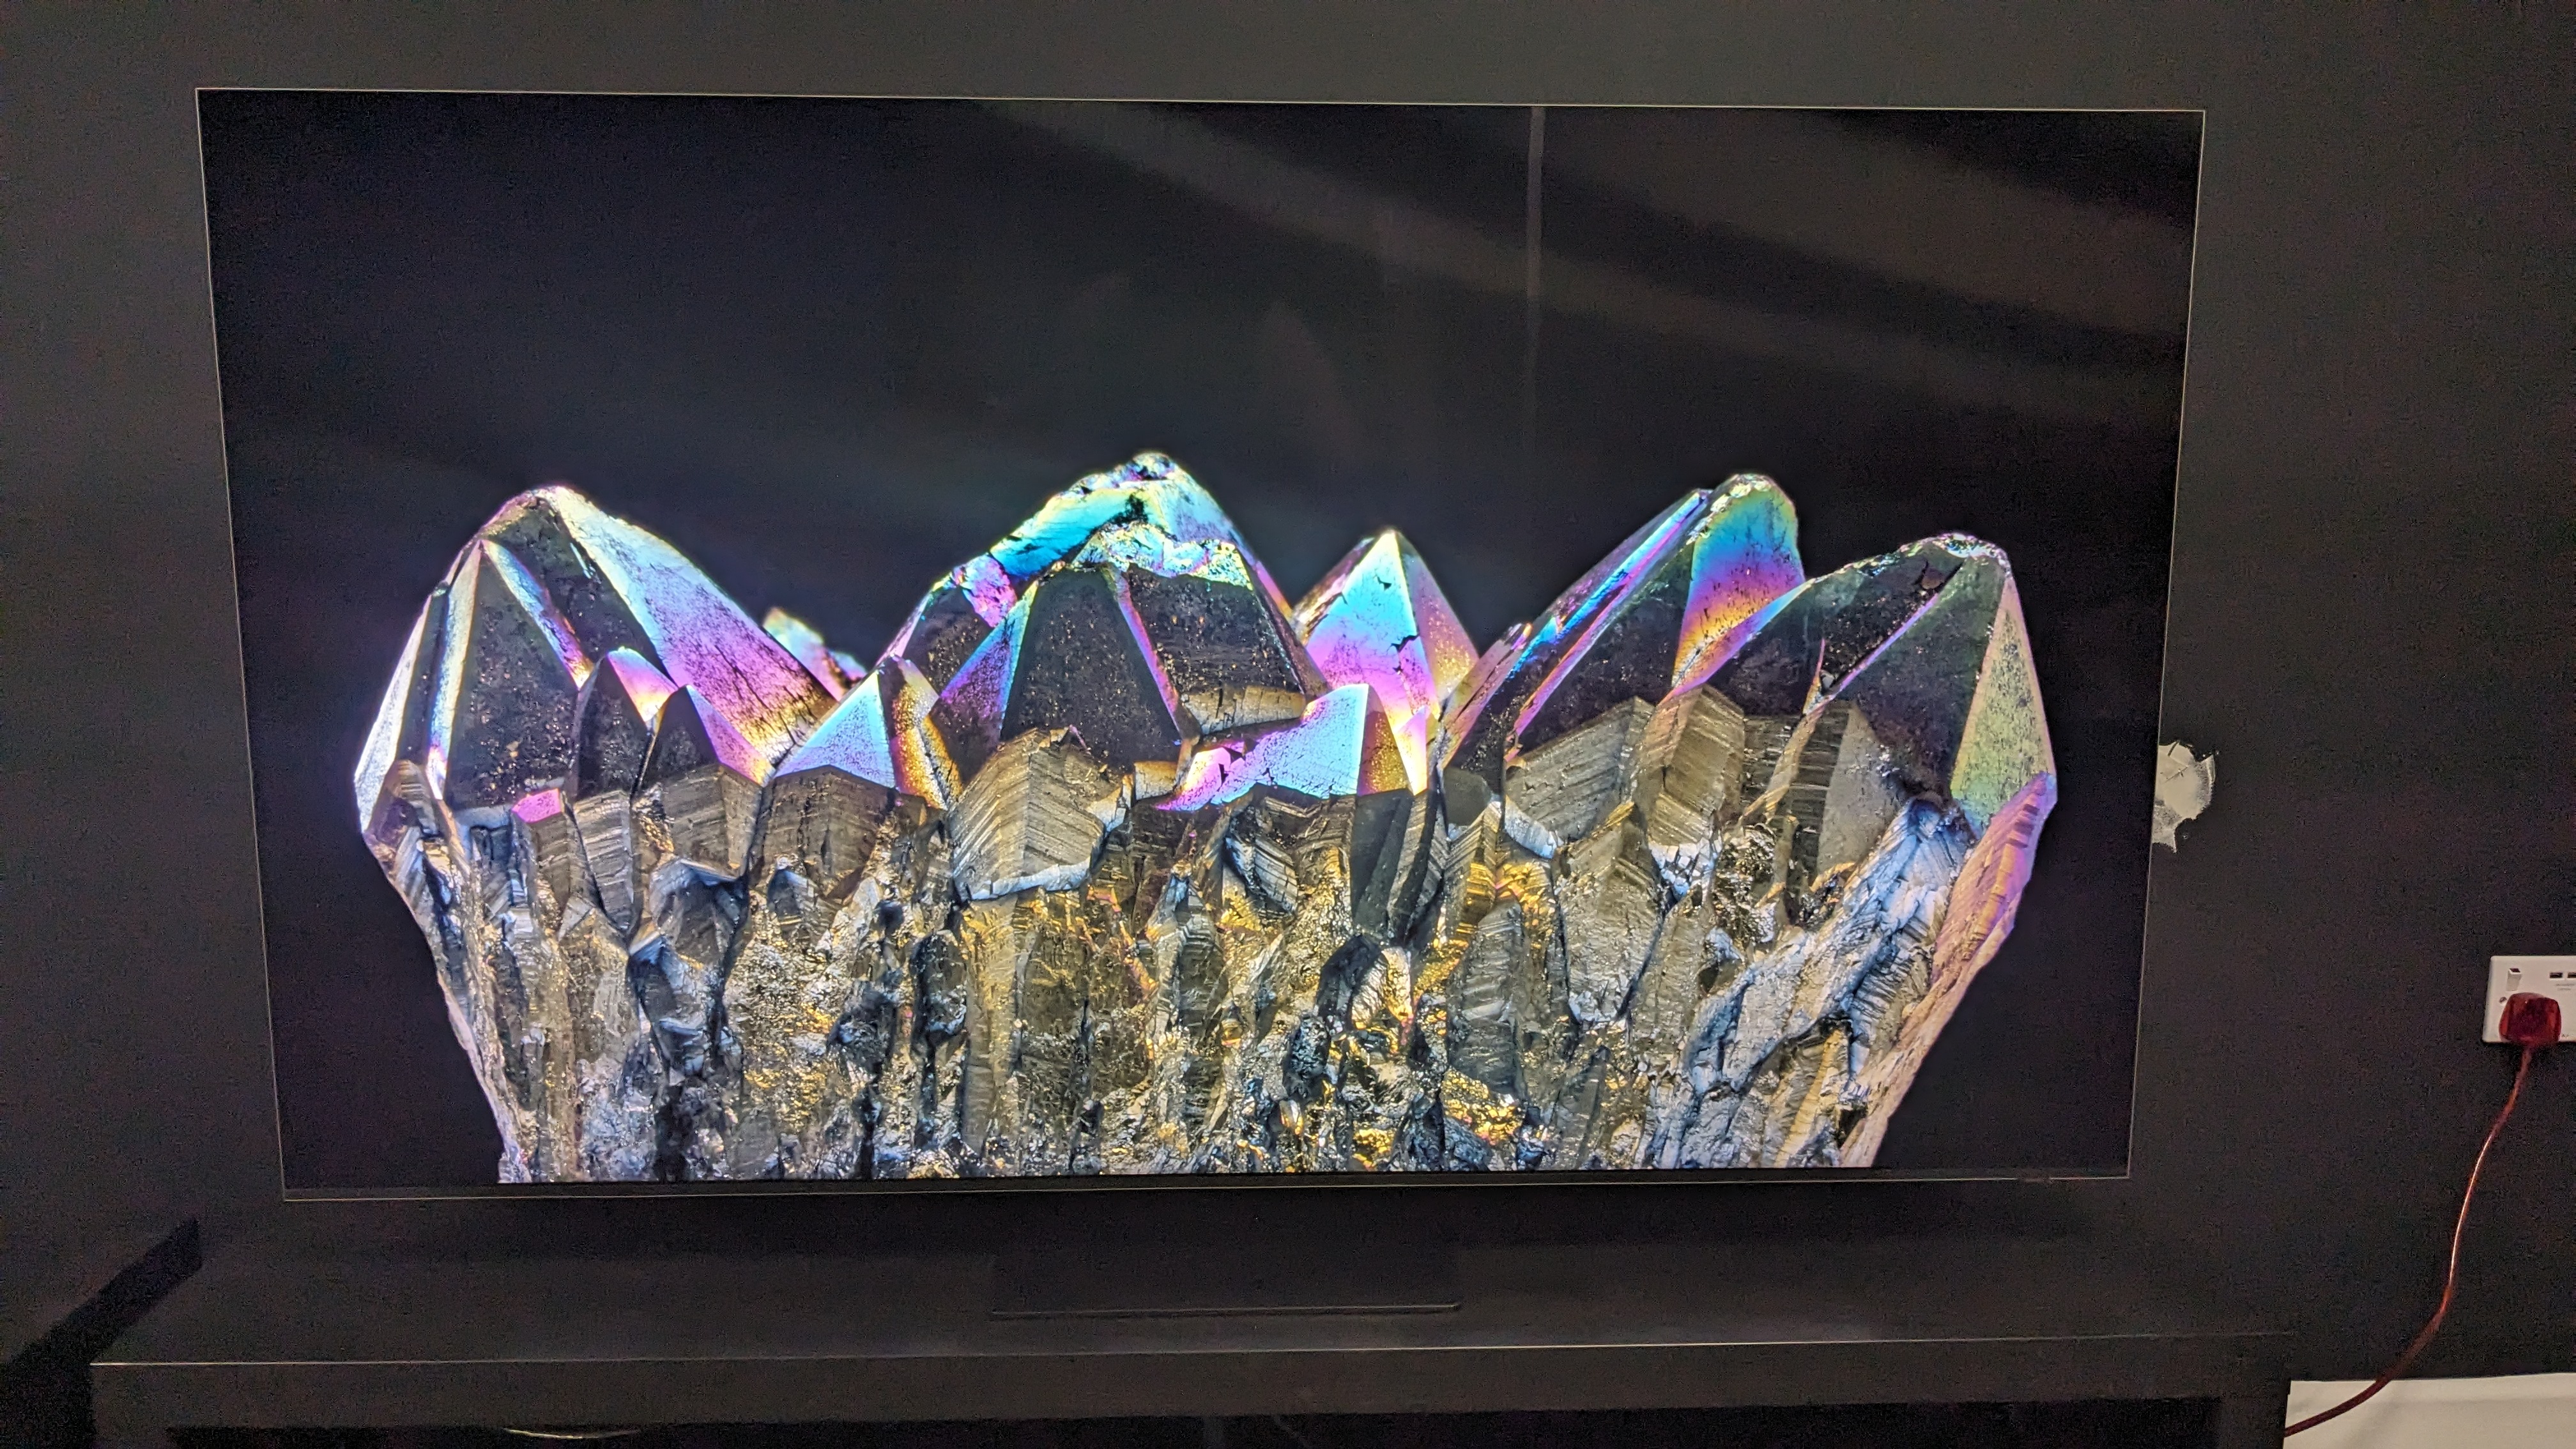 Samsung QN800D with gemstone on screen